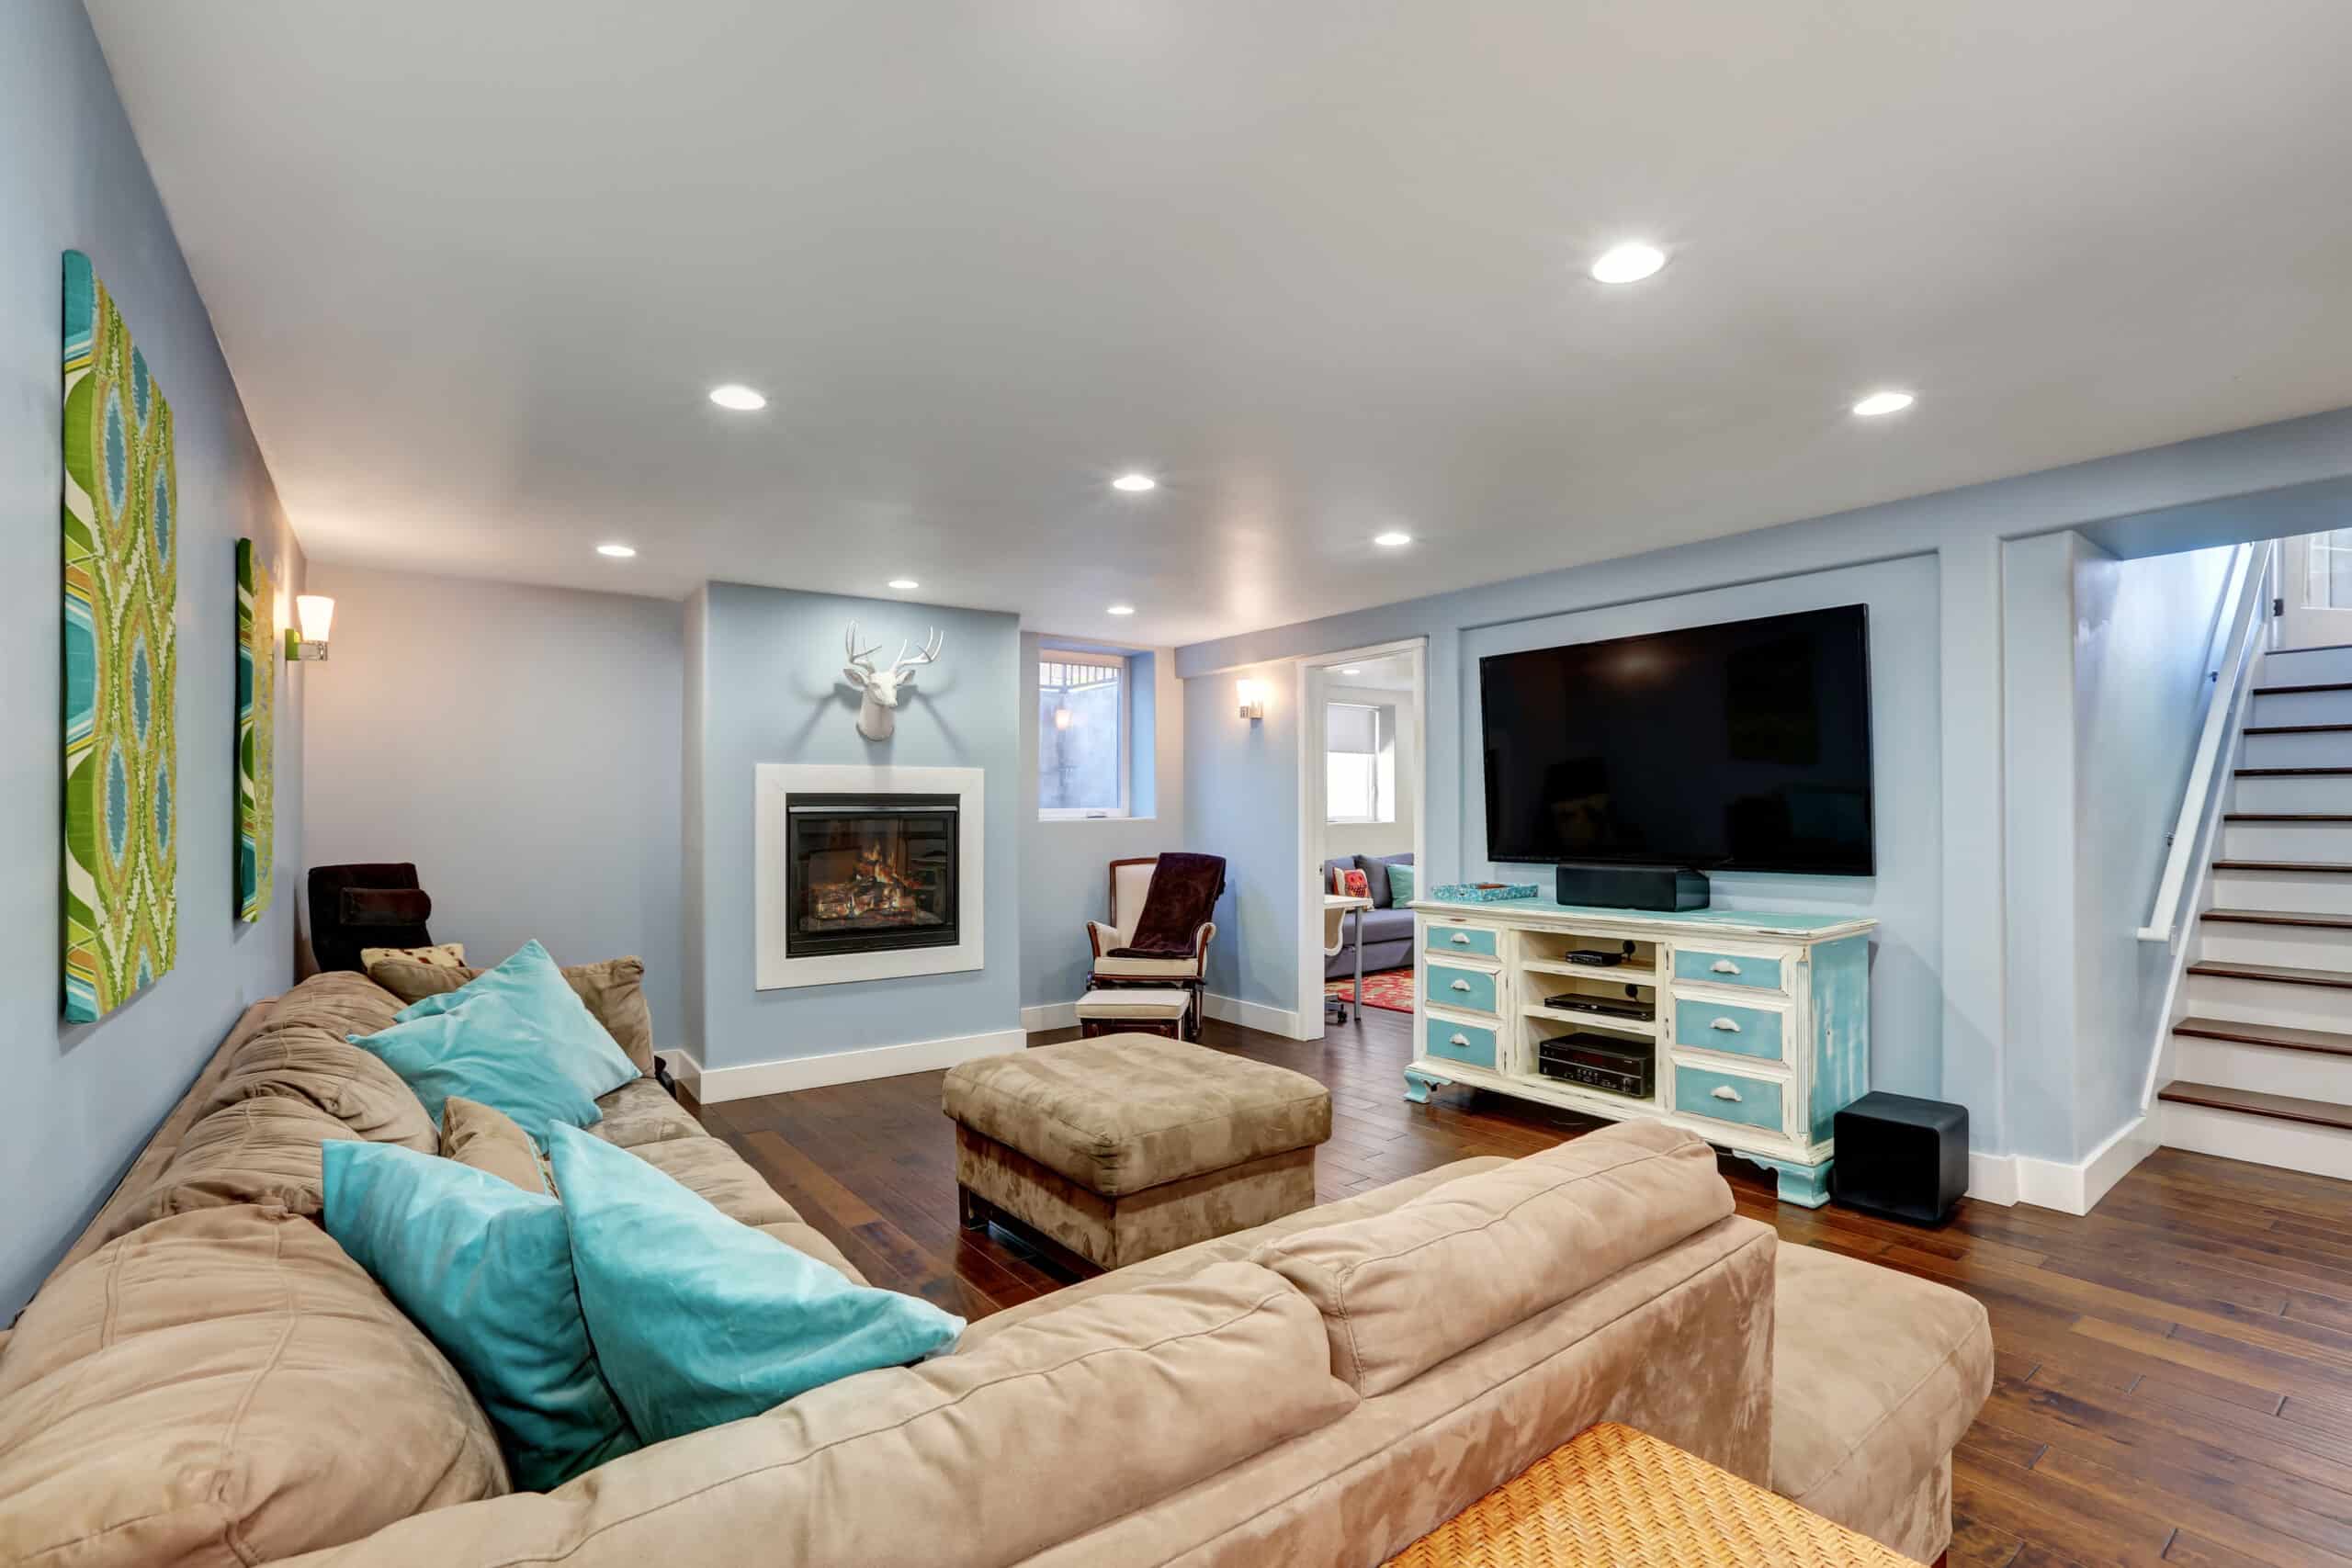 Pastel blue walls in basement living room interior. Large corner sofa with blue pillows and ottoman. Vintage white and blue TV cabinet.